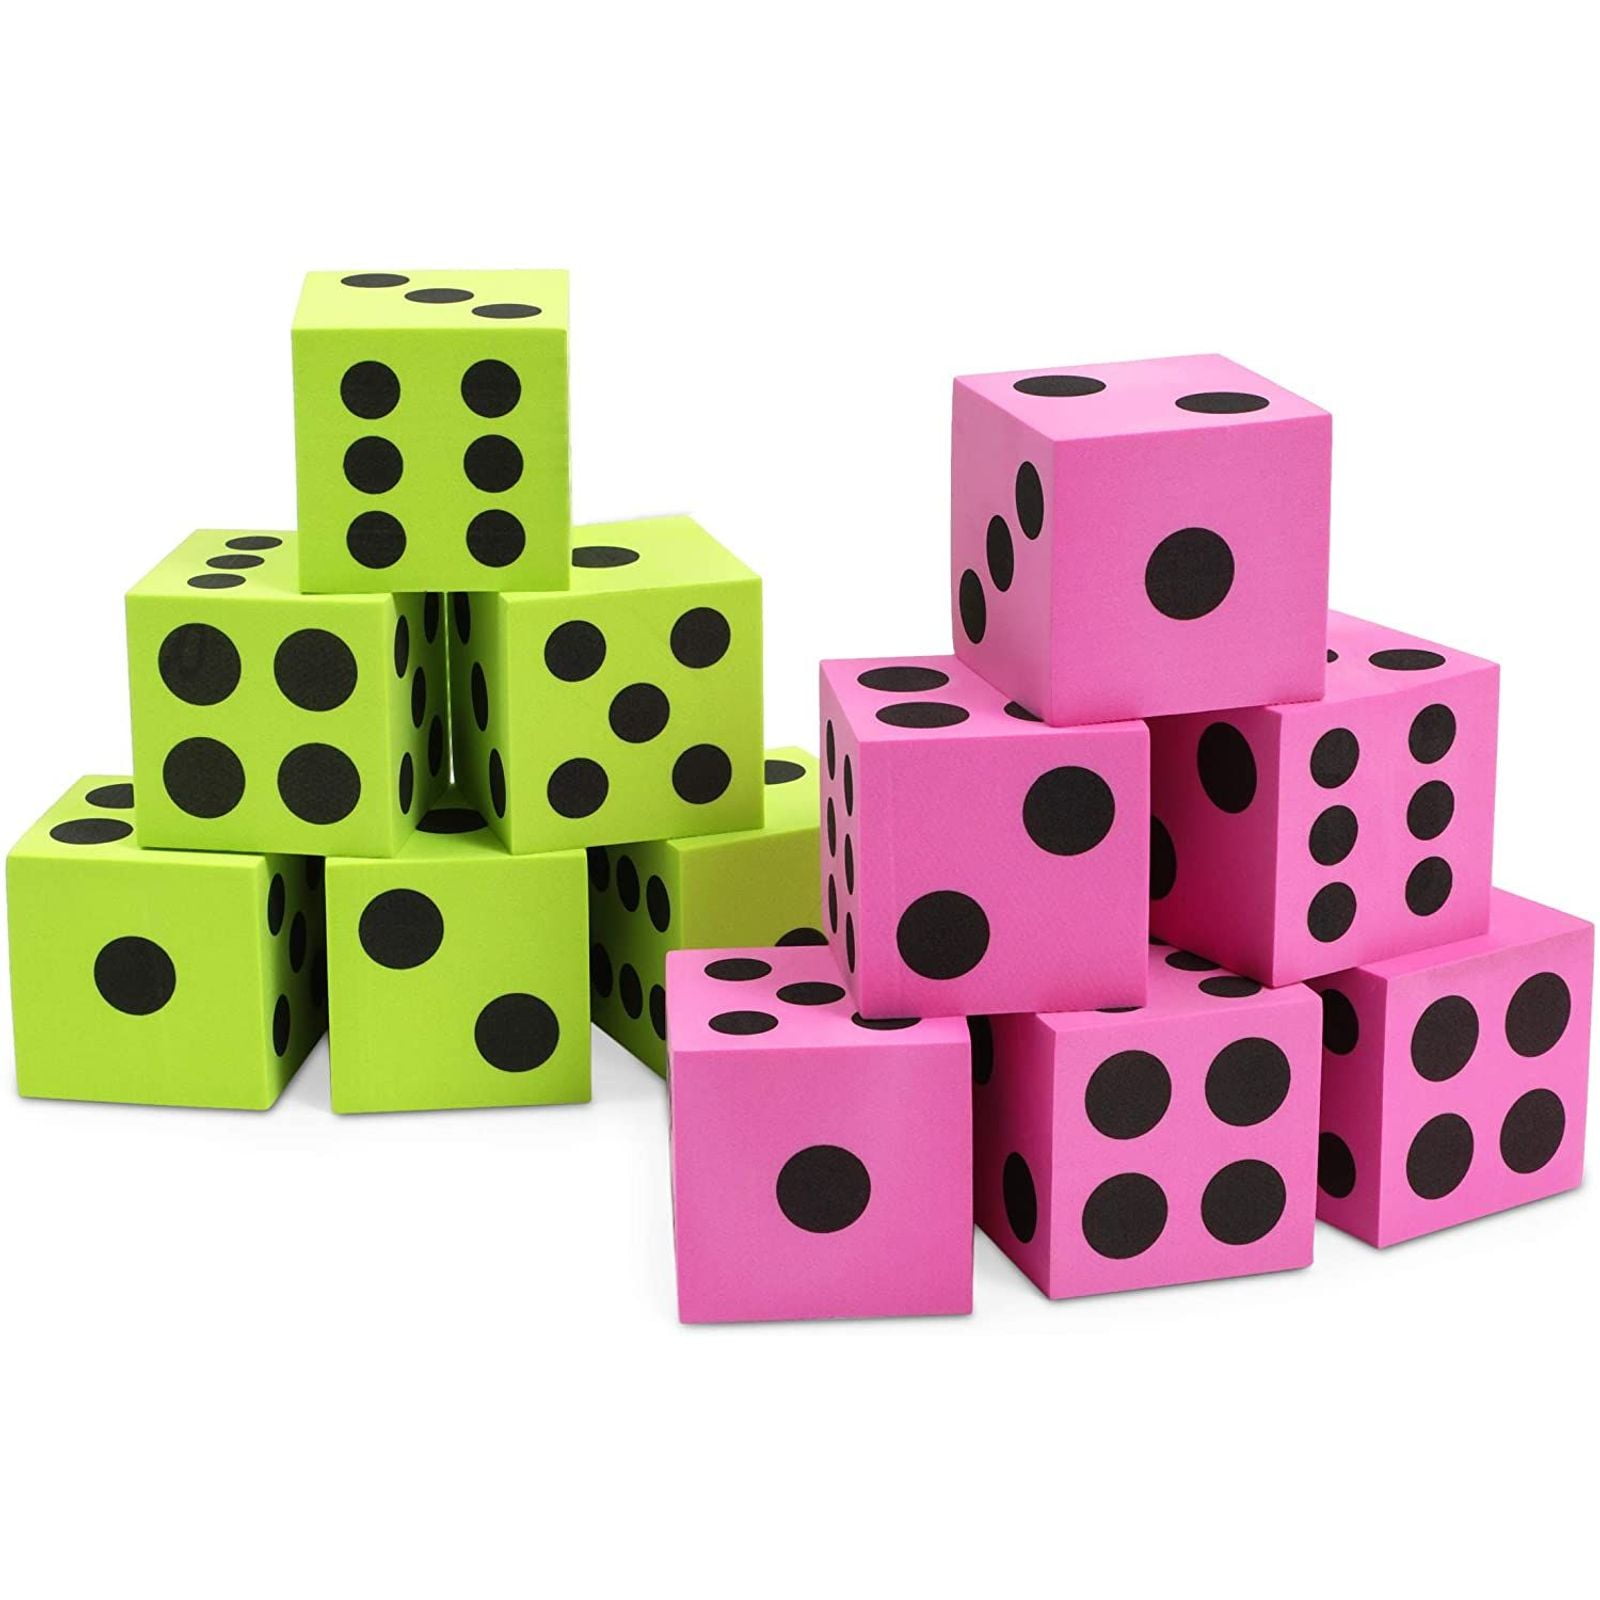 Sponge Dice Foam Dice Playing Dice for Math Teaching Puzzle Toy 8cm Green 